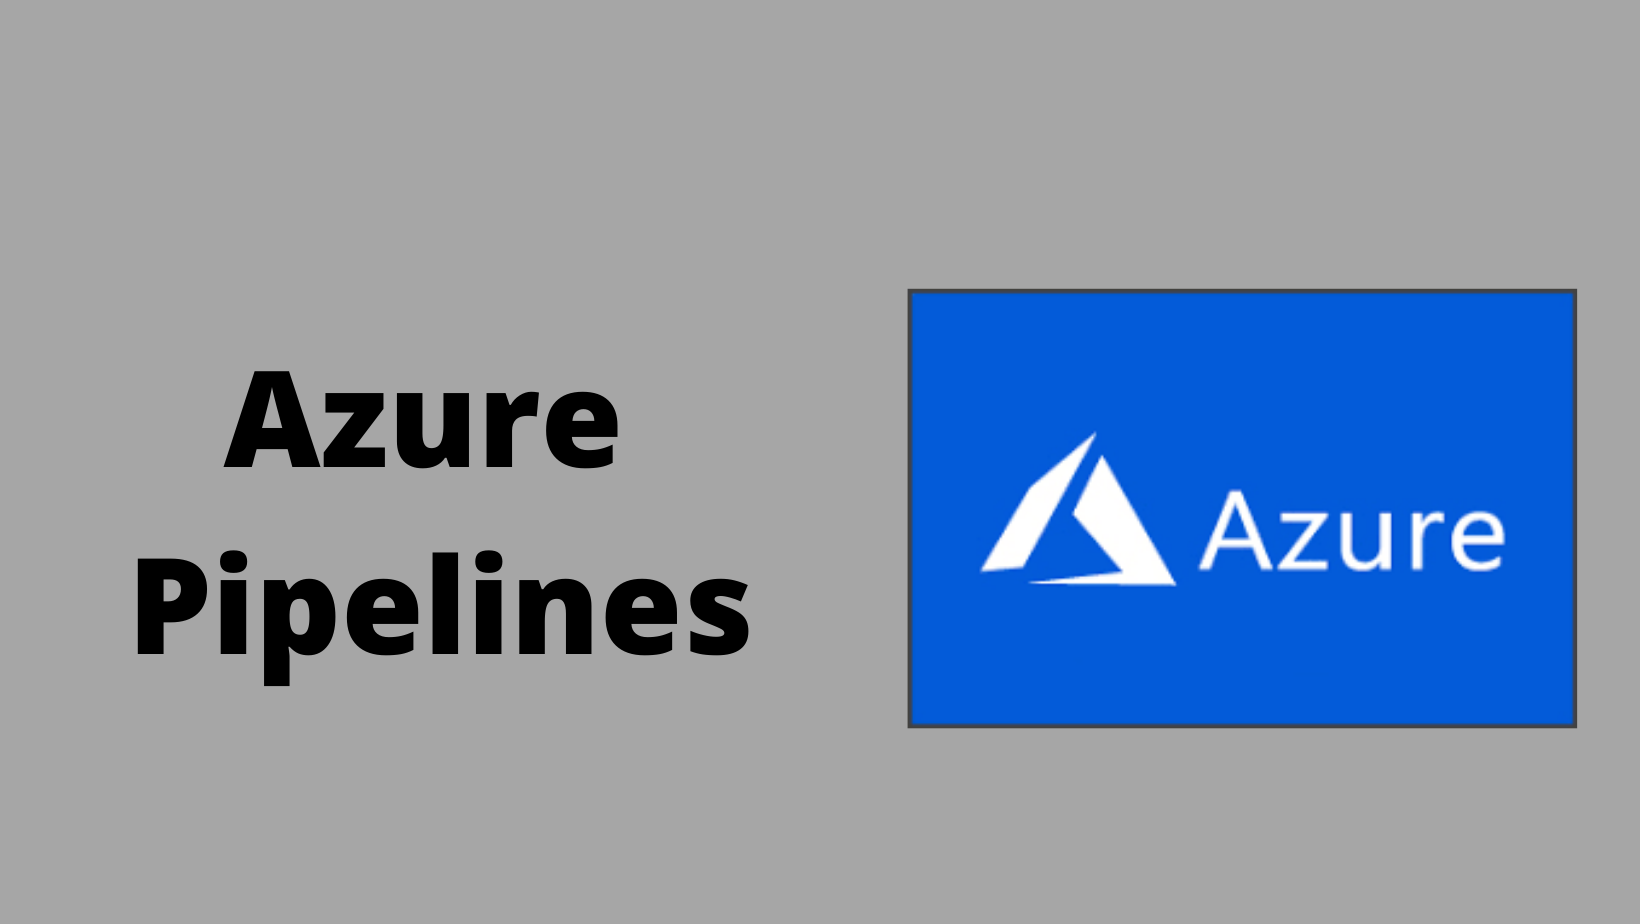 How to Create and Use Pipelines in Azure? - Azure Pipelines